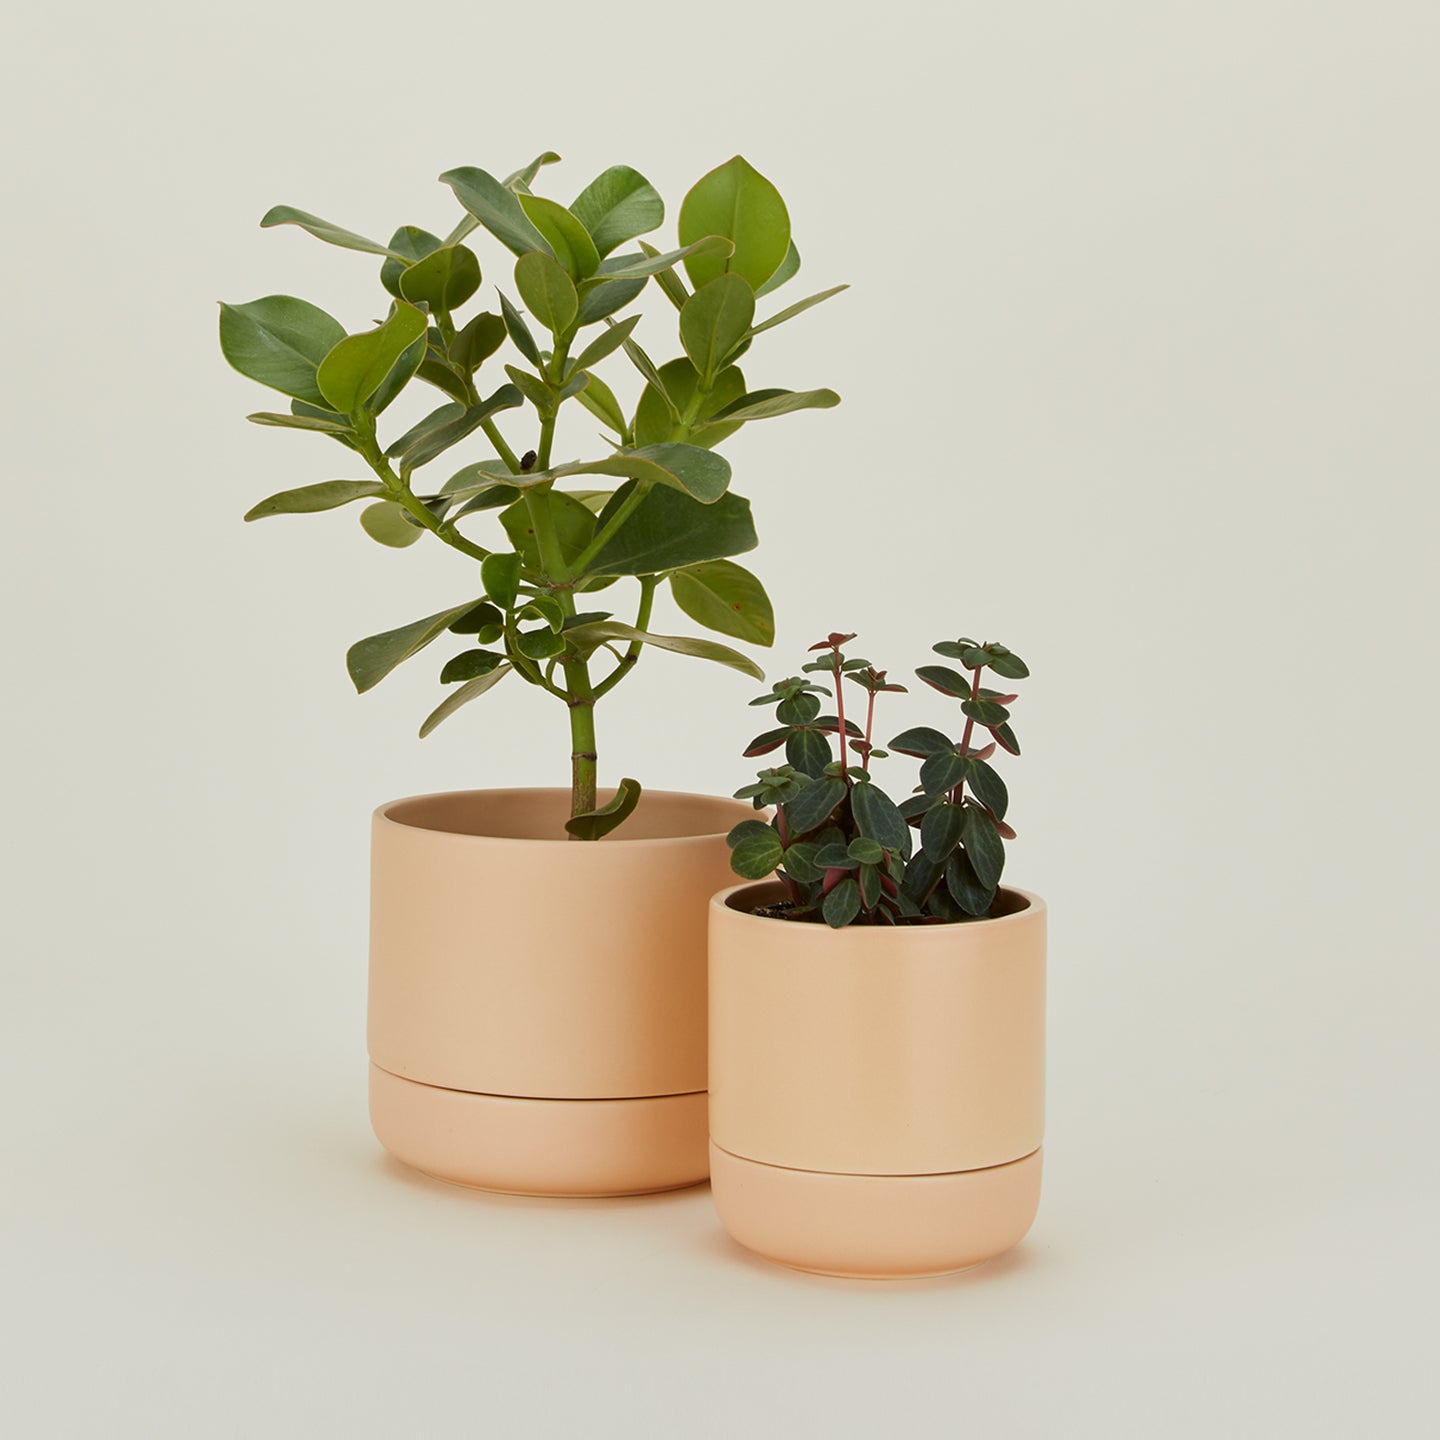 Franklin Self Watering Planter - Apricot